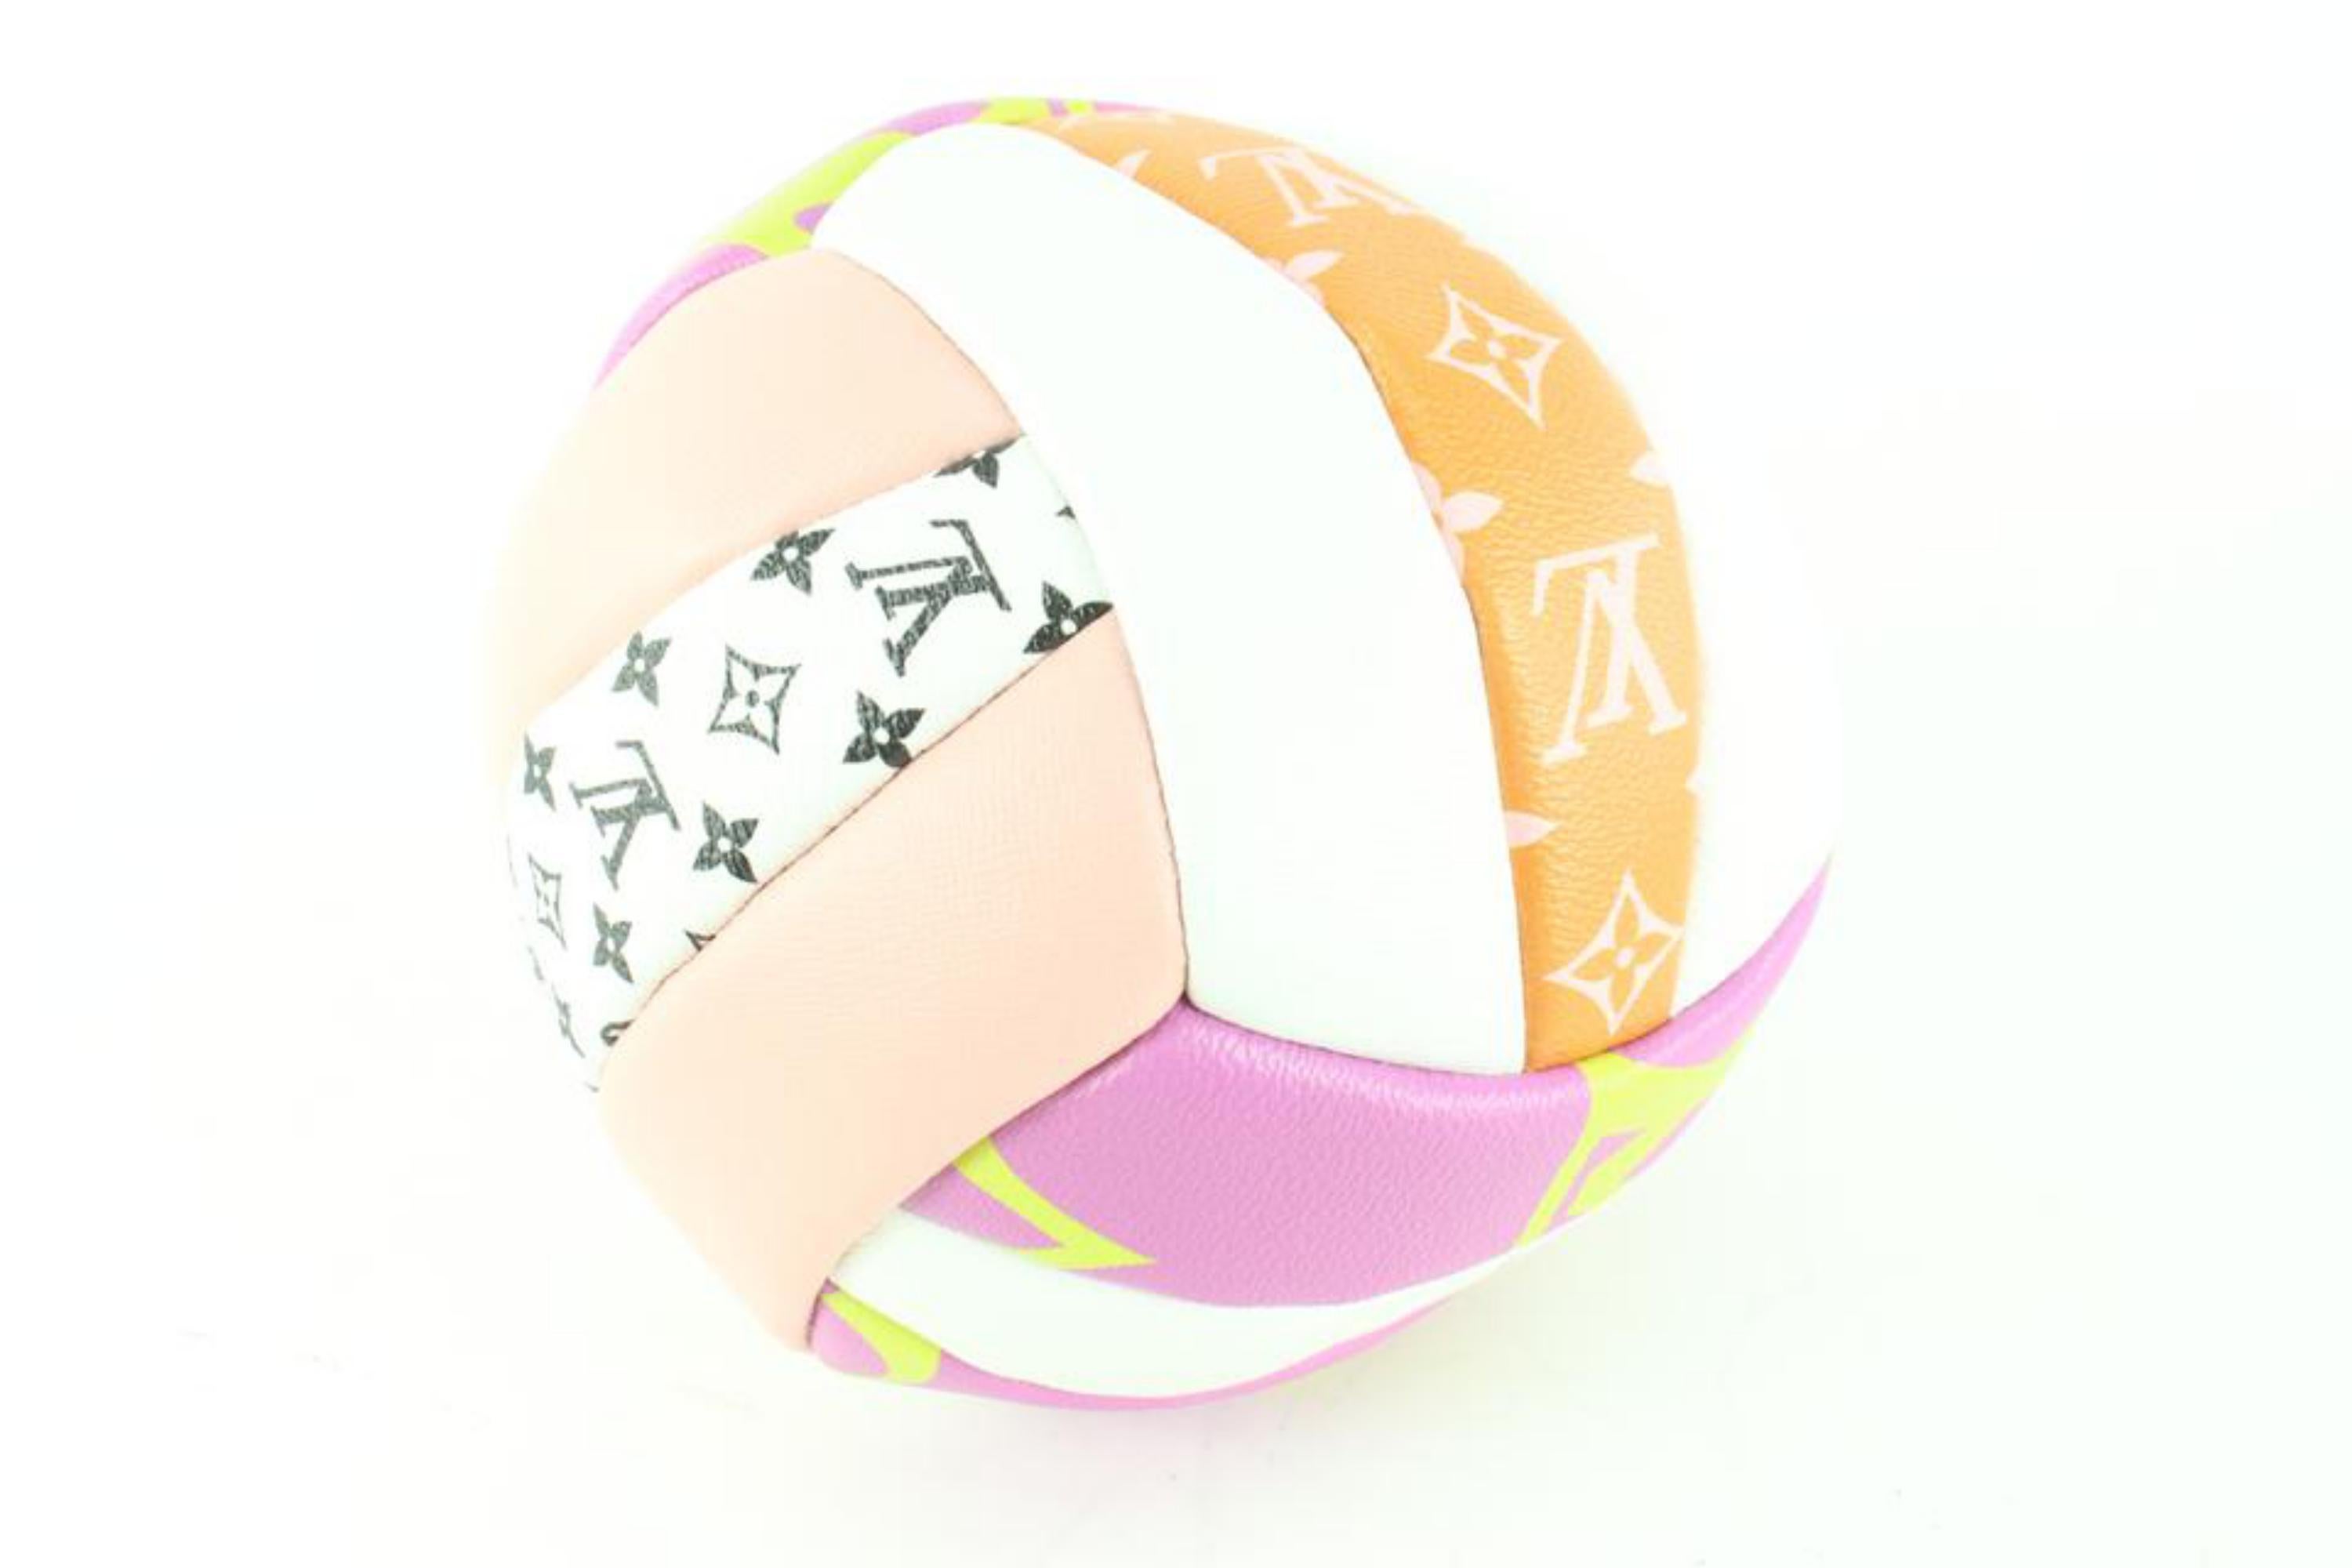 Gray Louis Vuitton SS20 Limited Pink x Orange Monogram Giant Volleyball 39lk62s For Sale